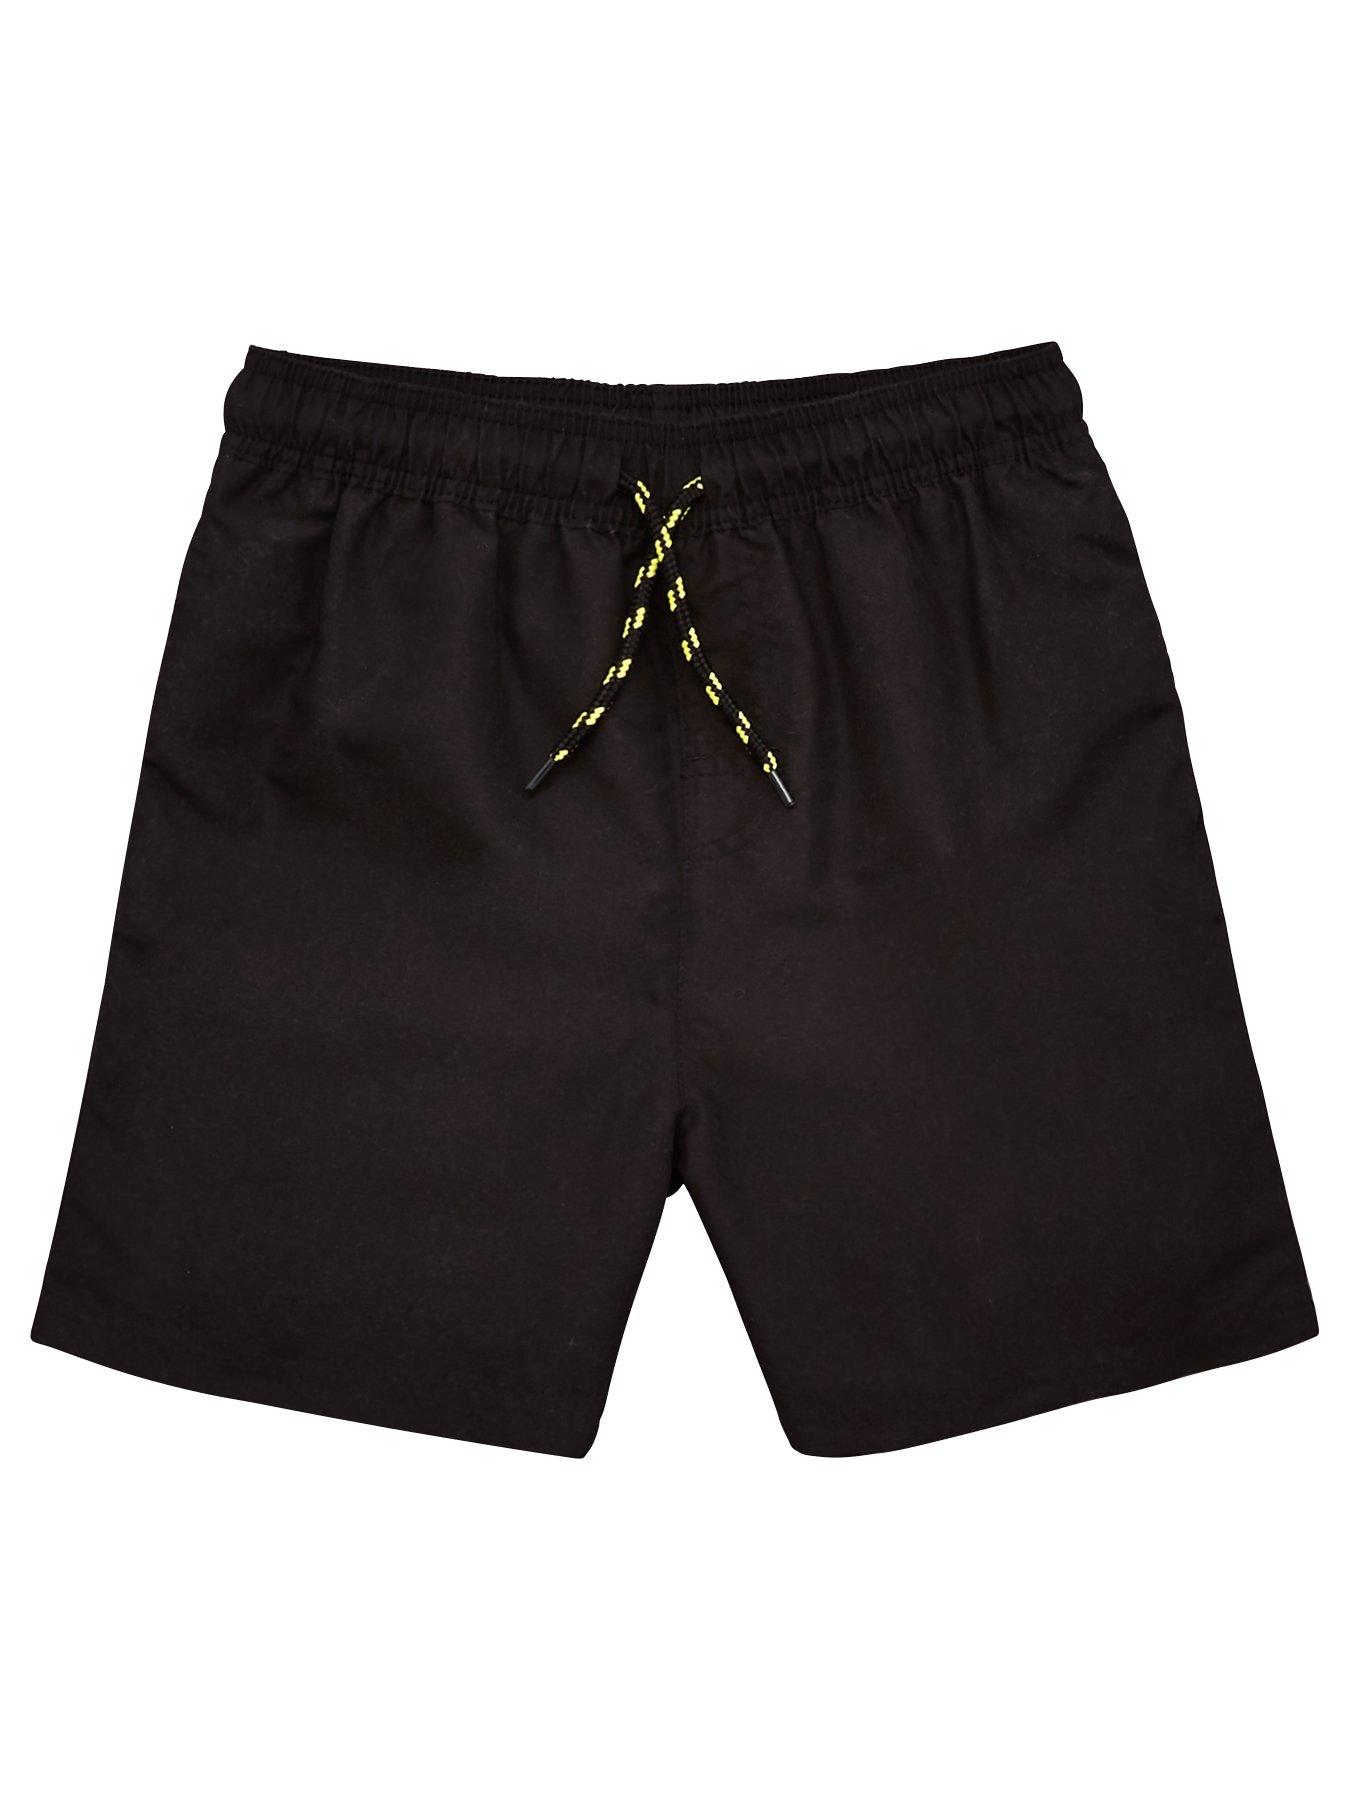 Details about   Speedo Infant Boys Sports Brief Swimming Swim Trunks Ages 6 Months-6 Years New 